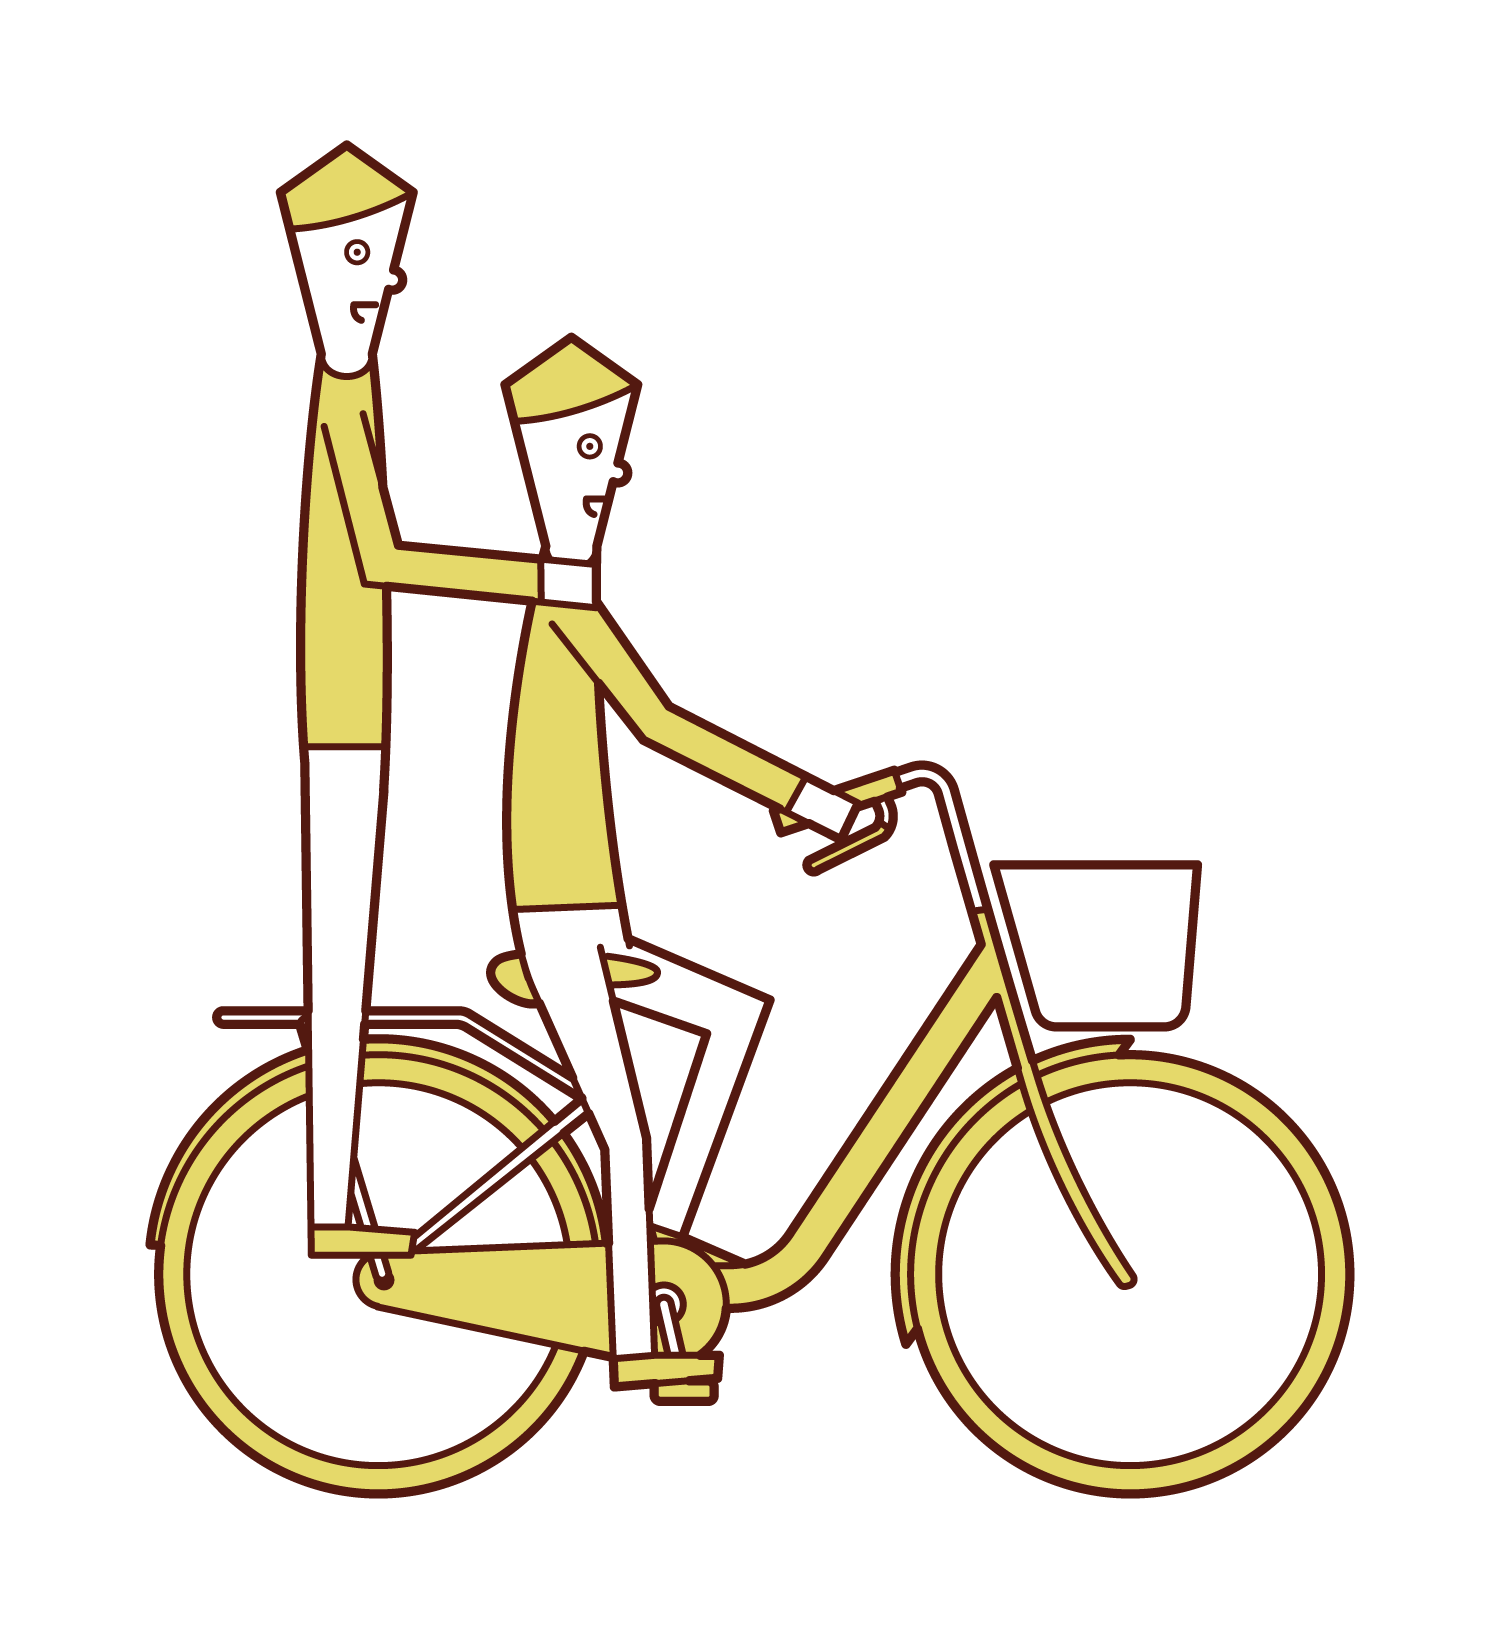 Illustration of a man riding a two-seater on a bicycle